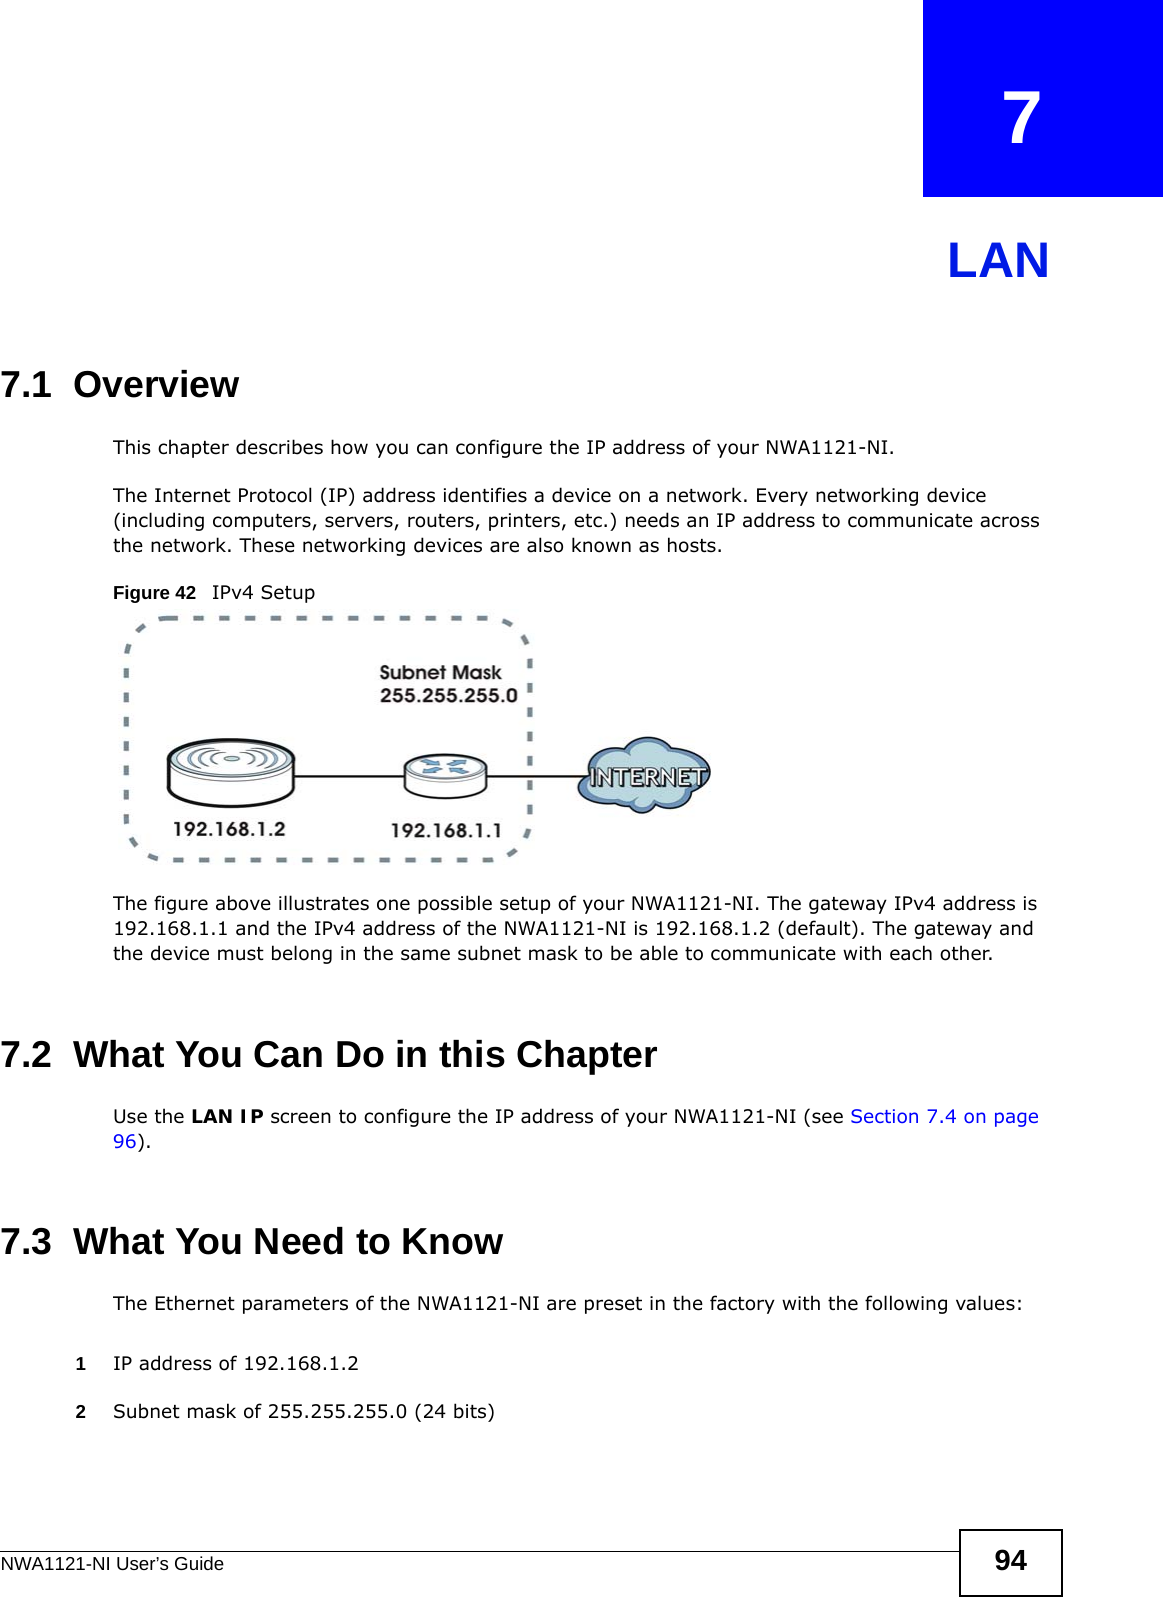 NWA1121-NI User’s Guide 94CHAPTER   7LAN7.1  OverviewThis chapter describes how you can configure the IP address of your NWA1121-NI.The Internet Protocol (IP) address identifies a device on a network. Every networking device (including computers, servers, routers, printers, etc.) needs an IP address to communicate across the network. These networking devices are also known as hosts.Figure 42   IPv4 SetupThe figure above illustrates one possible setup of your NWA1121-NI. The gateway IPv4 address is 192.168.1.1 and the IPv4 address of the NWA1121-NI is 192.168.1.2 (default). The gateway and the device must belong in the same subnet mask to be able to communicate with each other.7.2  What You Can Do in this ChapterUse the LAN IP screen to configure the IP address of your NWA1121-NI (see Section 7.4 on page 96).7.3  What You Need to KnowThe Ethernet parameters of the NWA1121-NI are preset in the factory with the following values:1IP address of 192.168.1.22Subnet mask of 255.255.255.0 (24 bits)